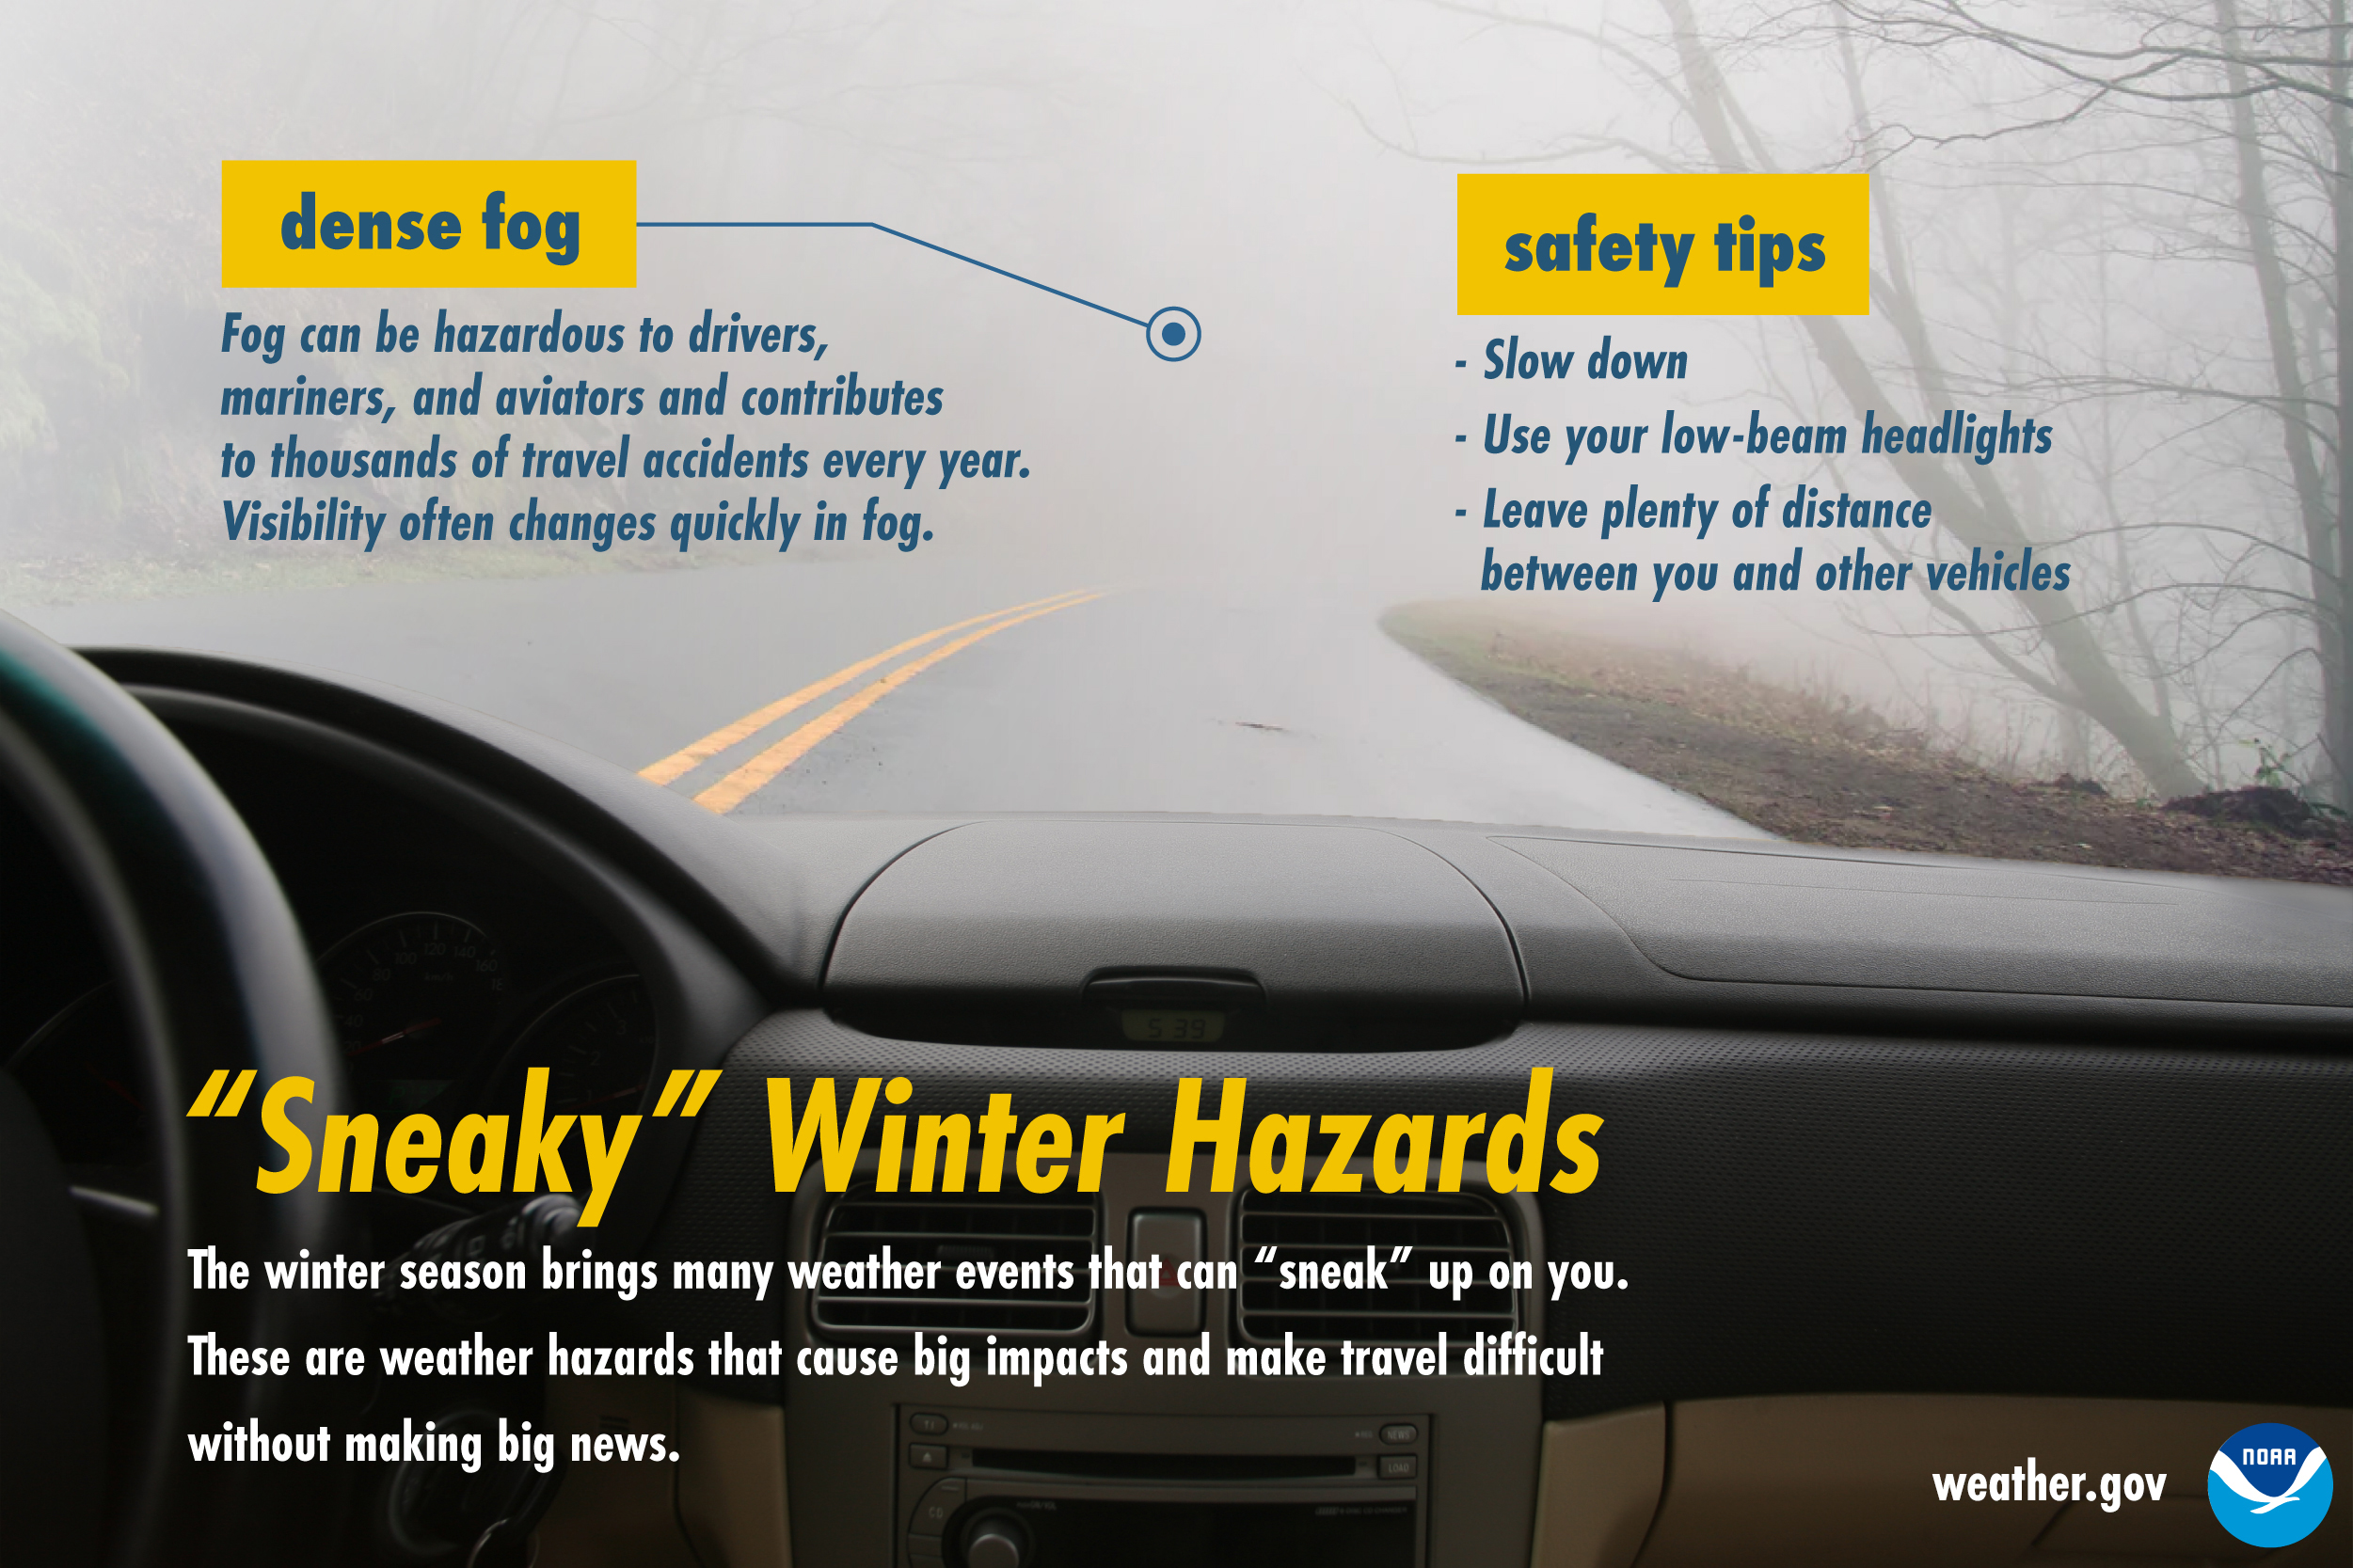 Sneaky Winter Hazards: Dense fog. Fog can be hazardous to driver, mariners, and aviators, and contributes to thousands of travel accidents every year. Visibility often changes quickly in fog. Safety tips: slow down; use your low-beam headlights; leave plenty of distance between you and other vehicles.